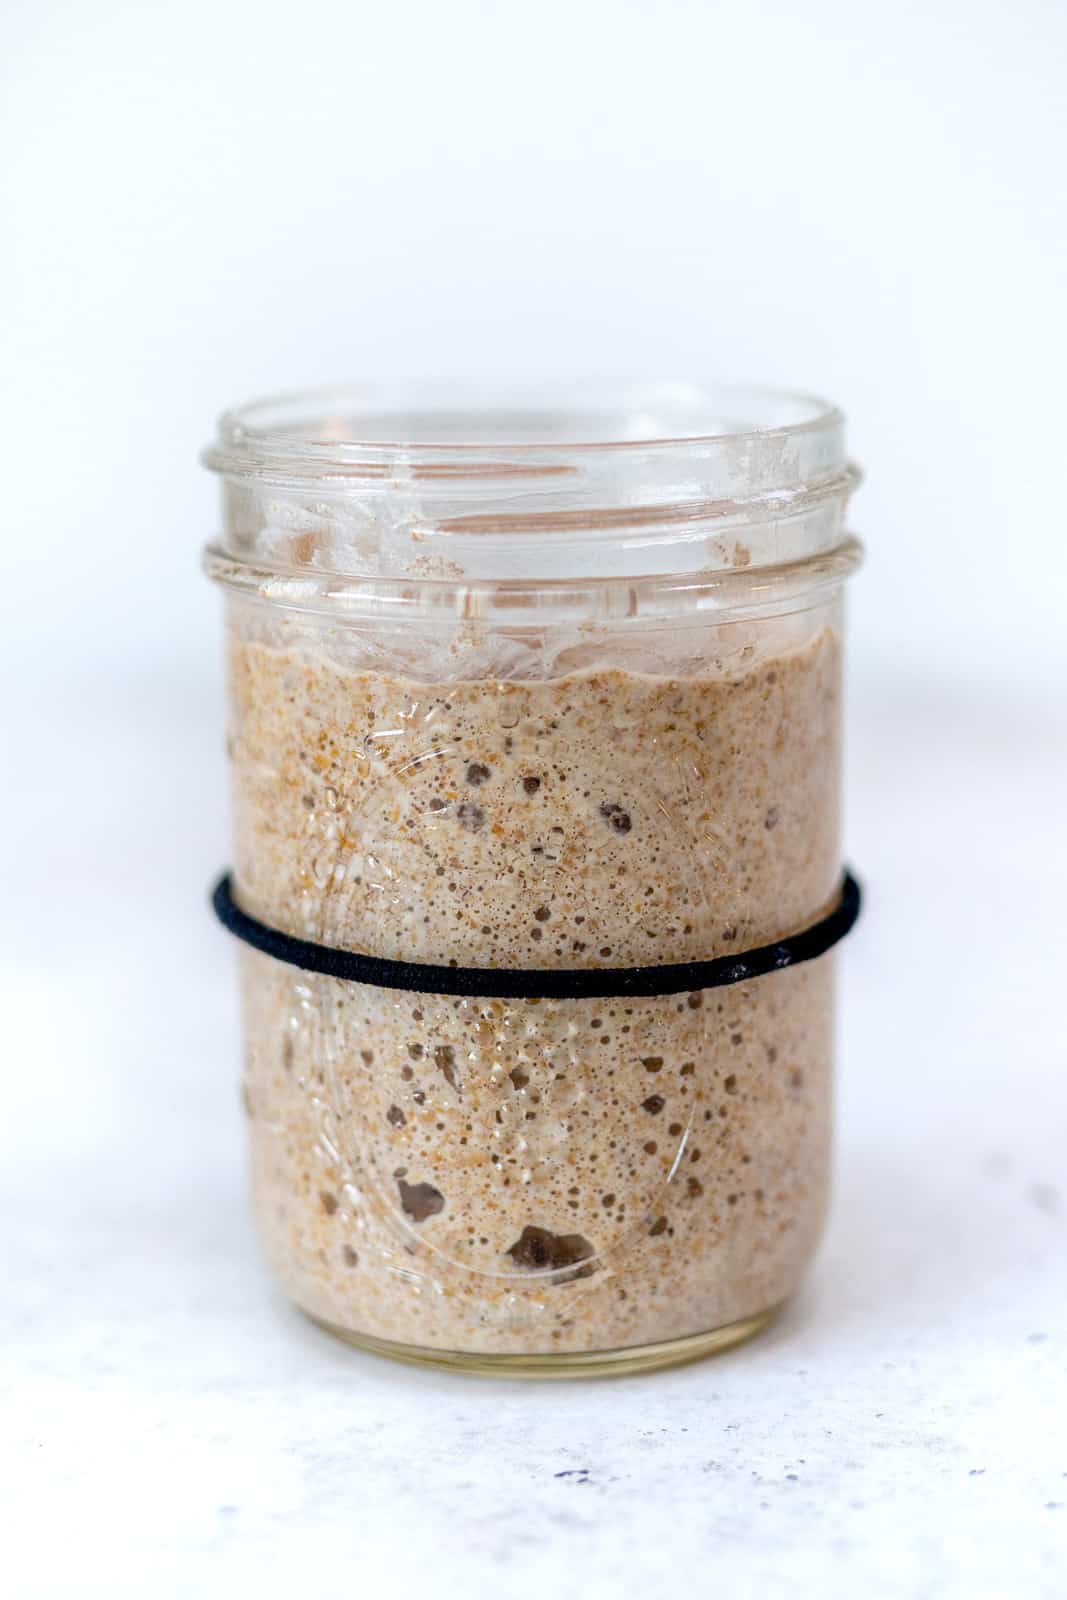 Active and bubbly sourdough starter in a glass jar